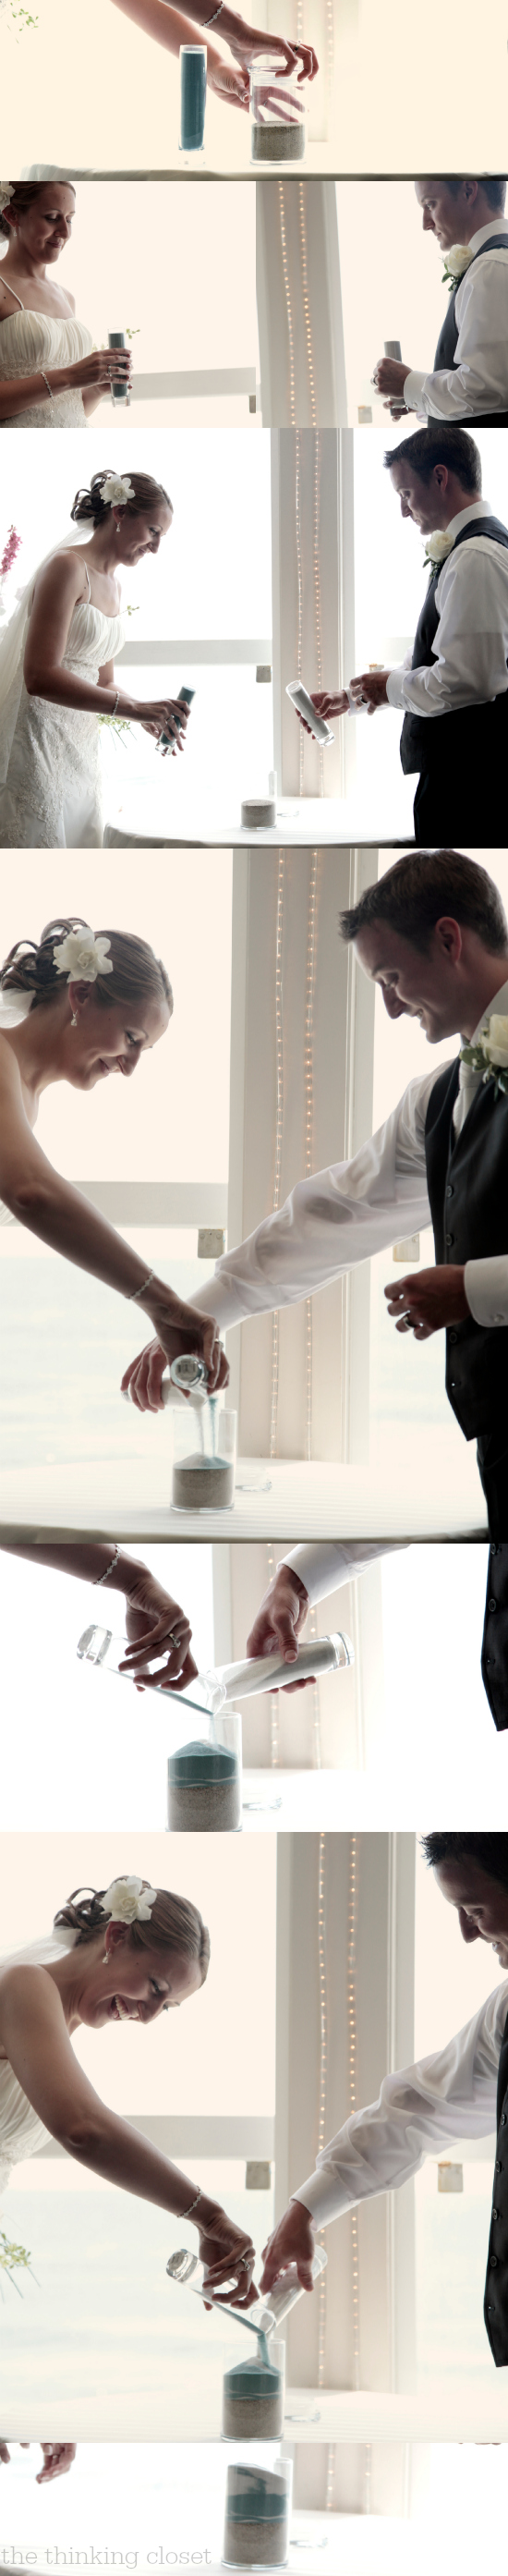 Our DIY Wedding Ceremony: Unity Sand as a tangible representation of the marriage covenant.